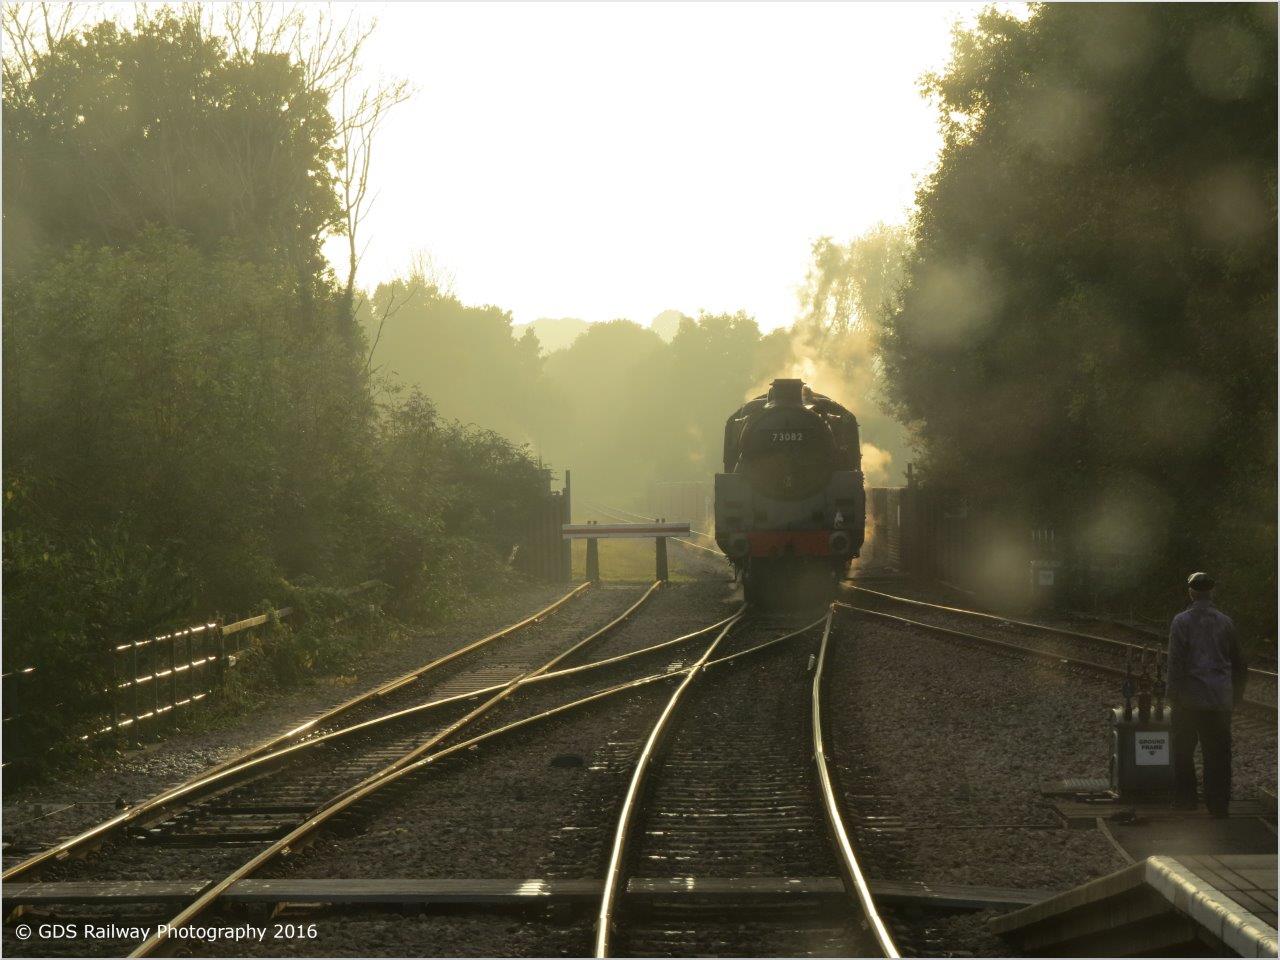 73082 Camelot running round the last train of the day